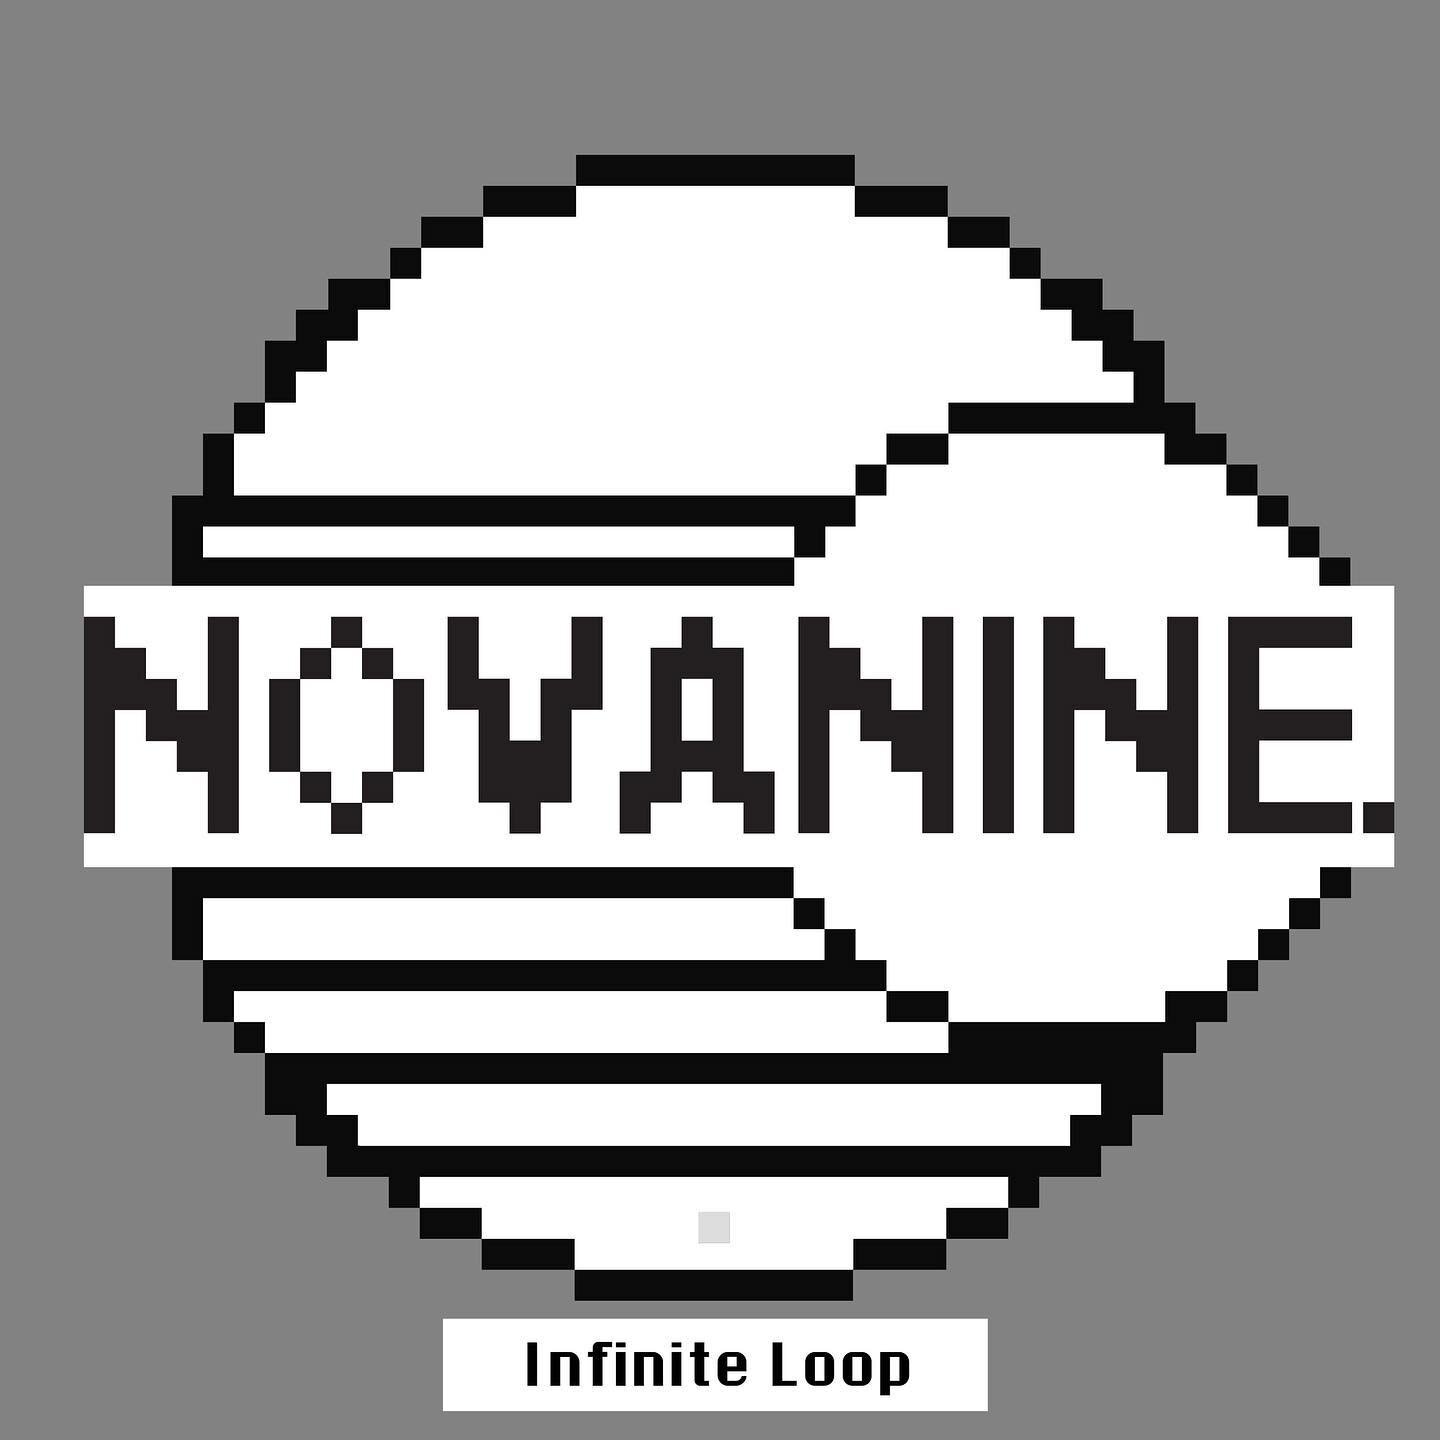 One more thing&hellip; a brand new song from NovaNine is available TODAY! Surprise and delight your ears with &lsquo;Infinite Loop&rsquo;, a chill synthwave track to get you through all your rainy days. #synthwave #retrowave #macintosh #apple #applei